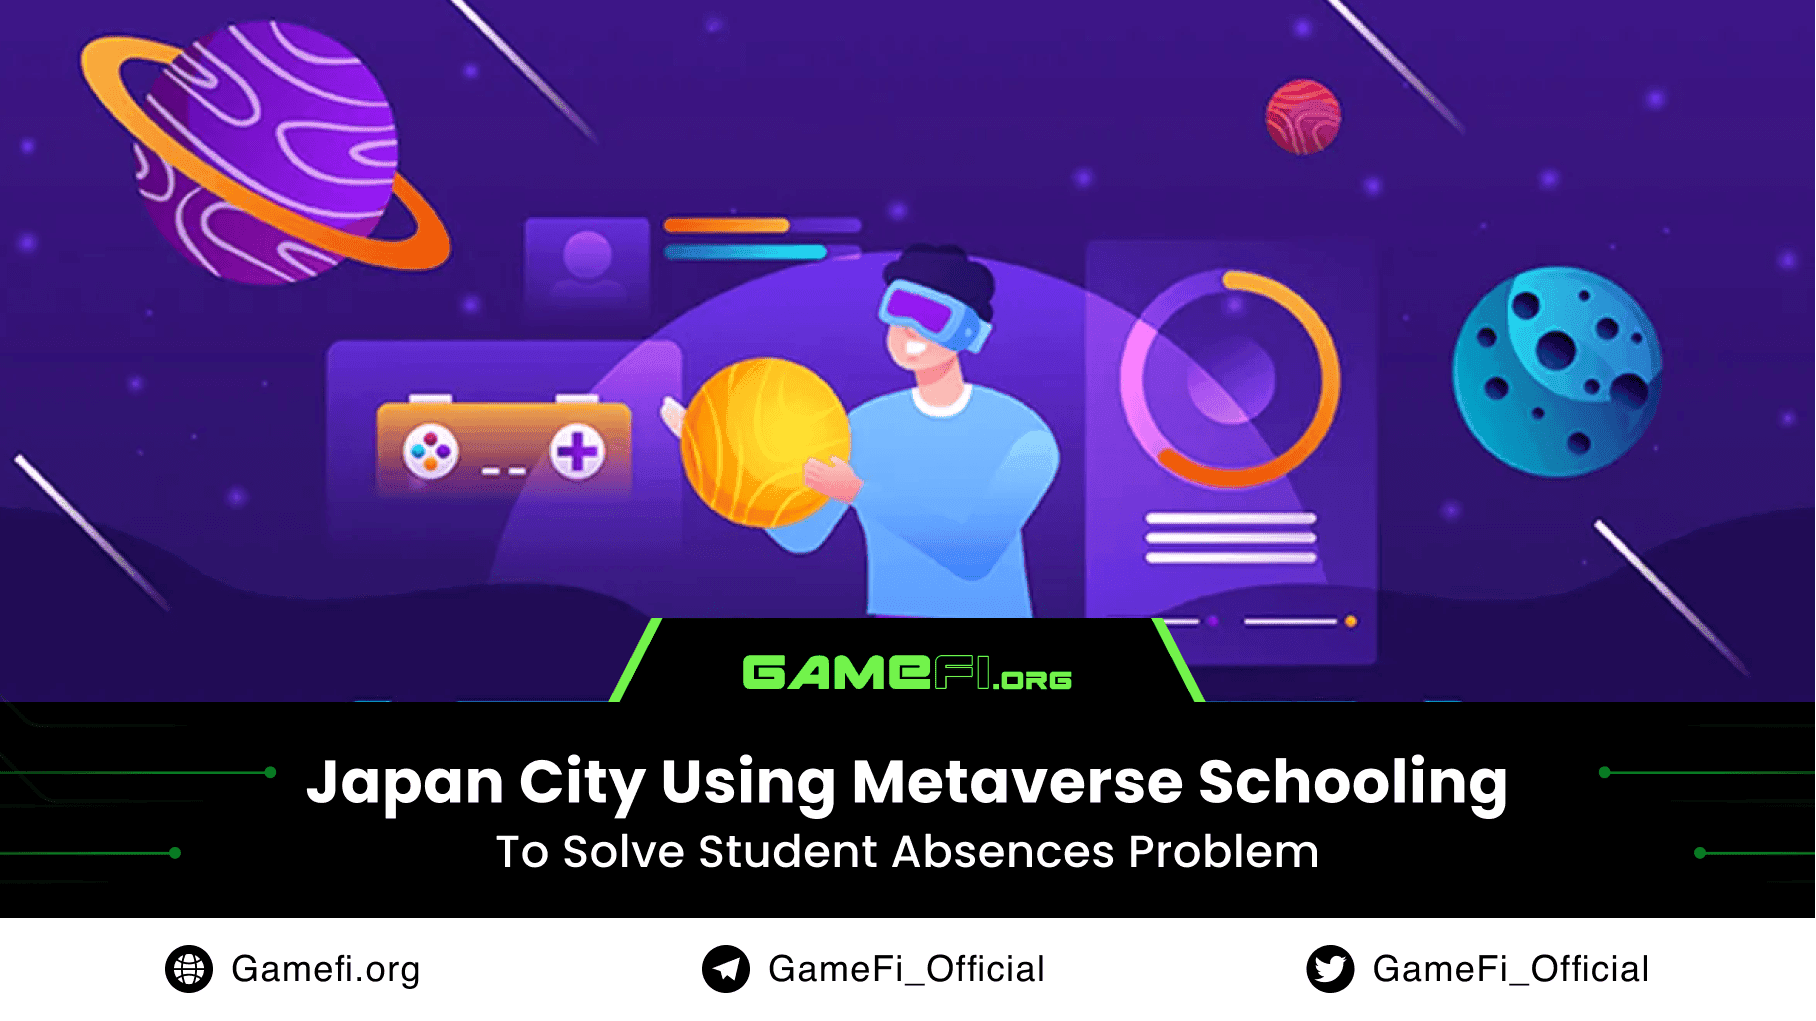 Japan City Using Metaverse Schooling to Solve Student Absences Problem